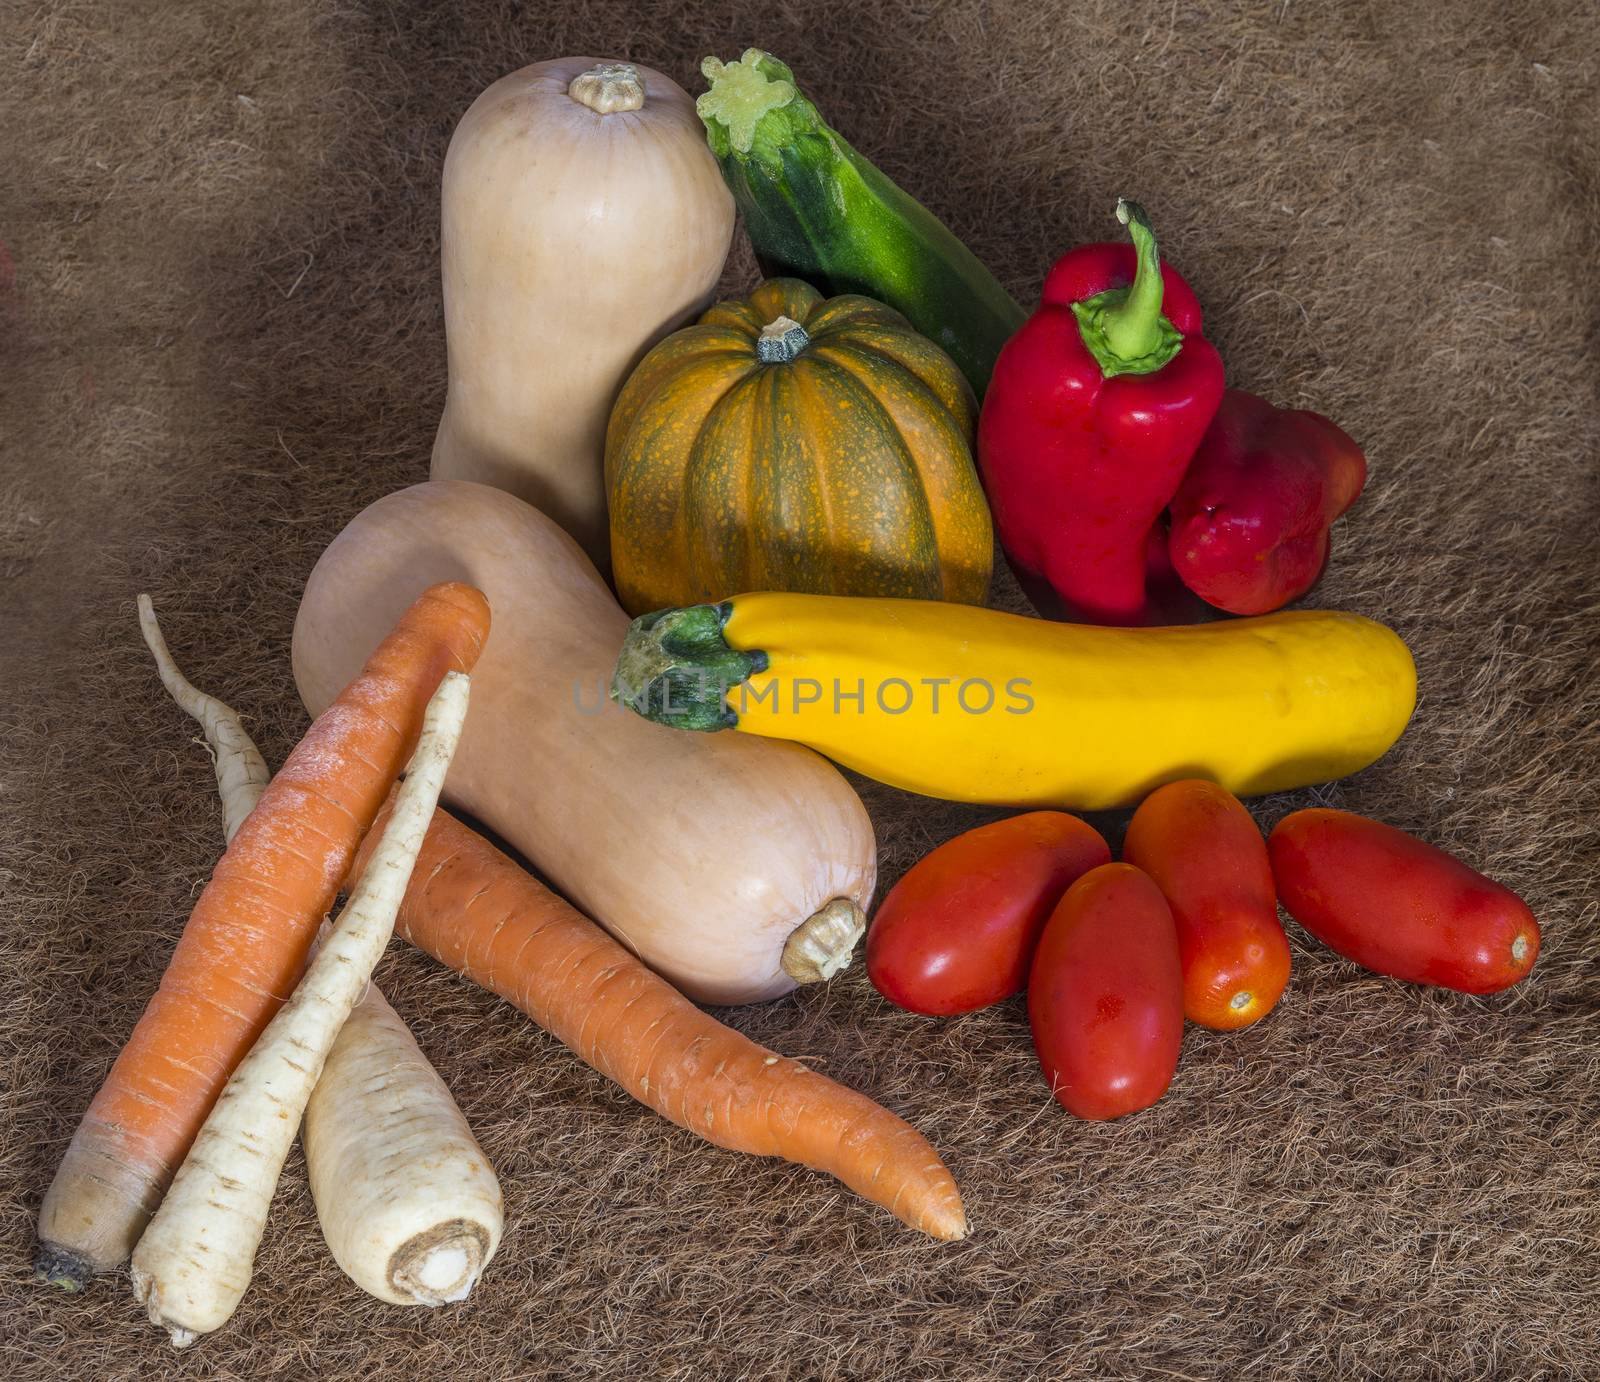 Autumn harvest. The farmers bring to the markets, grown on farms, fruit and vegetables